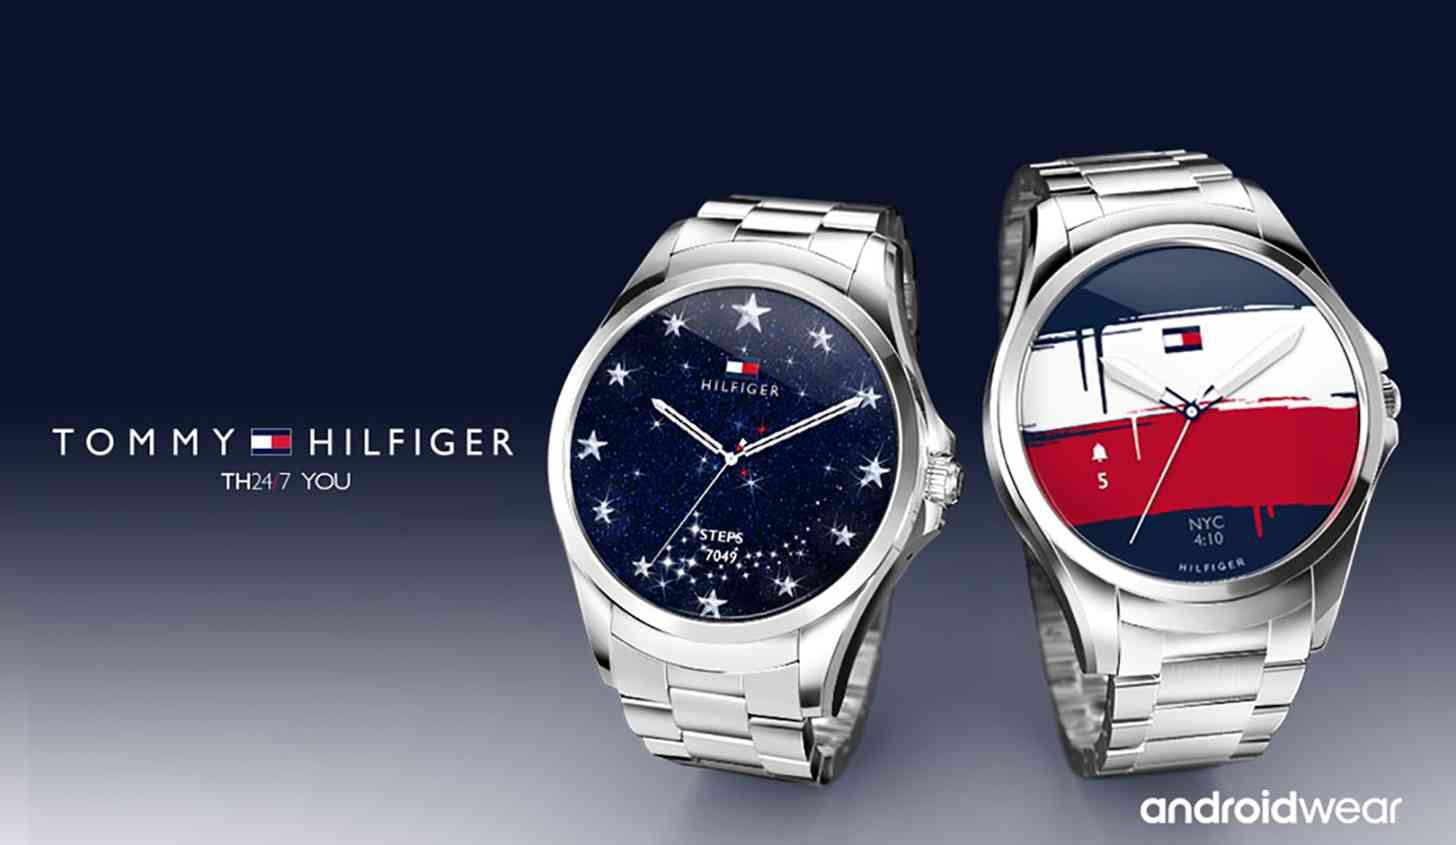 Tommy Hilfiger 24/7You Android Wear smartwatch